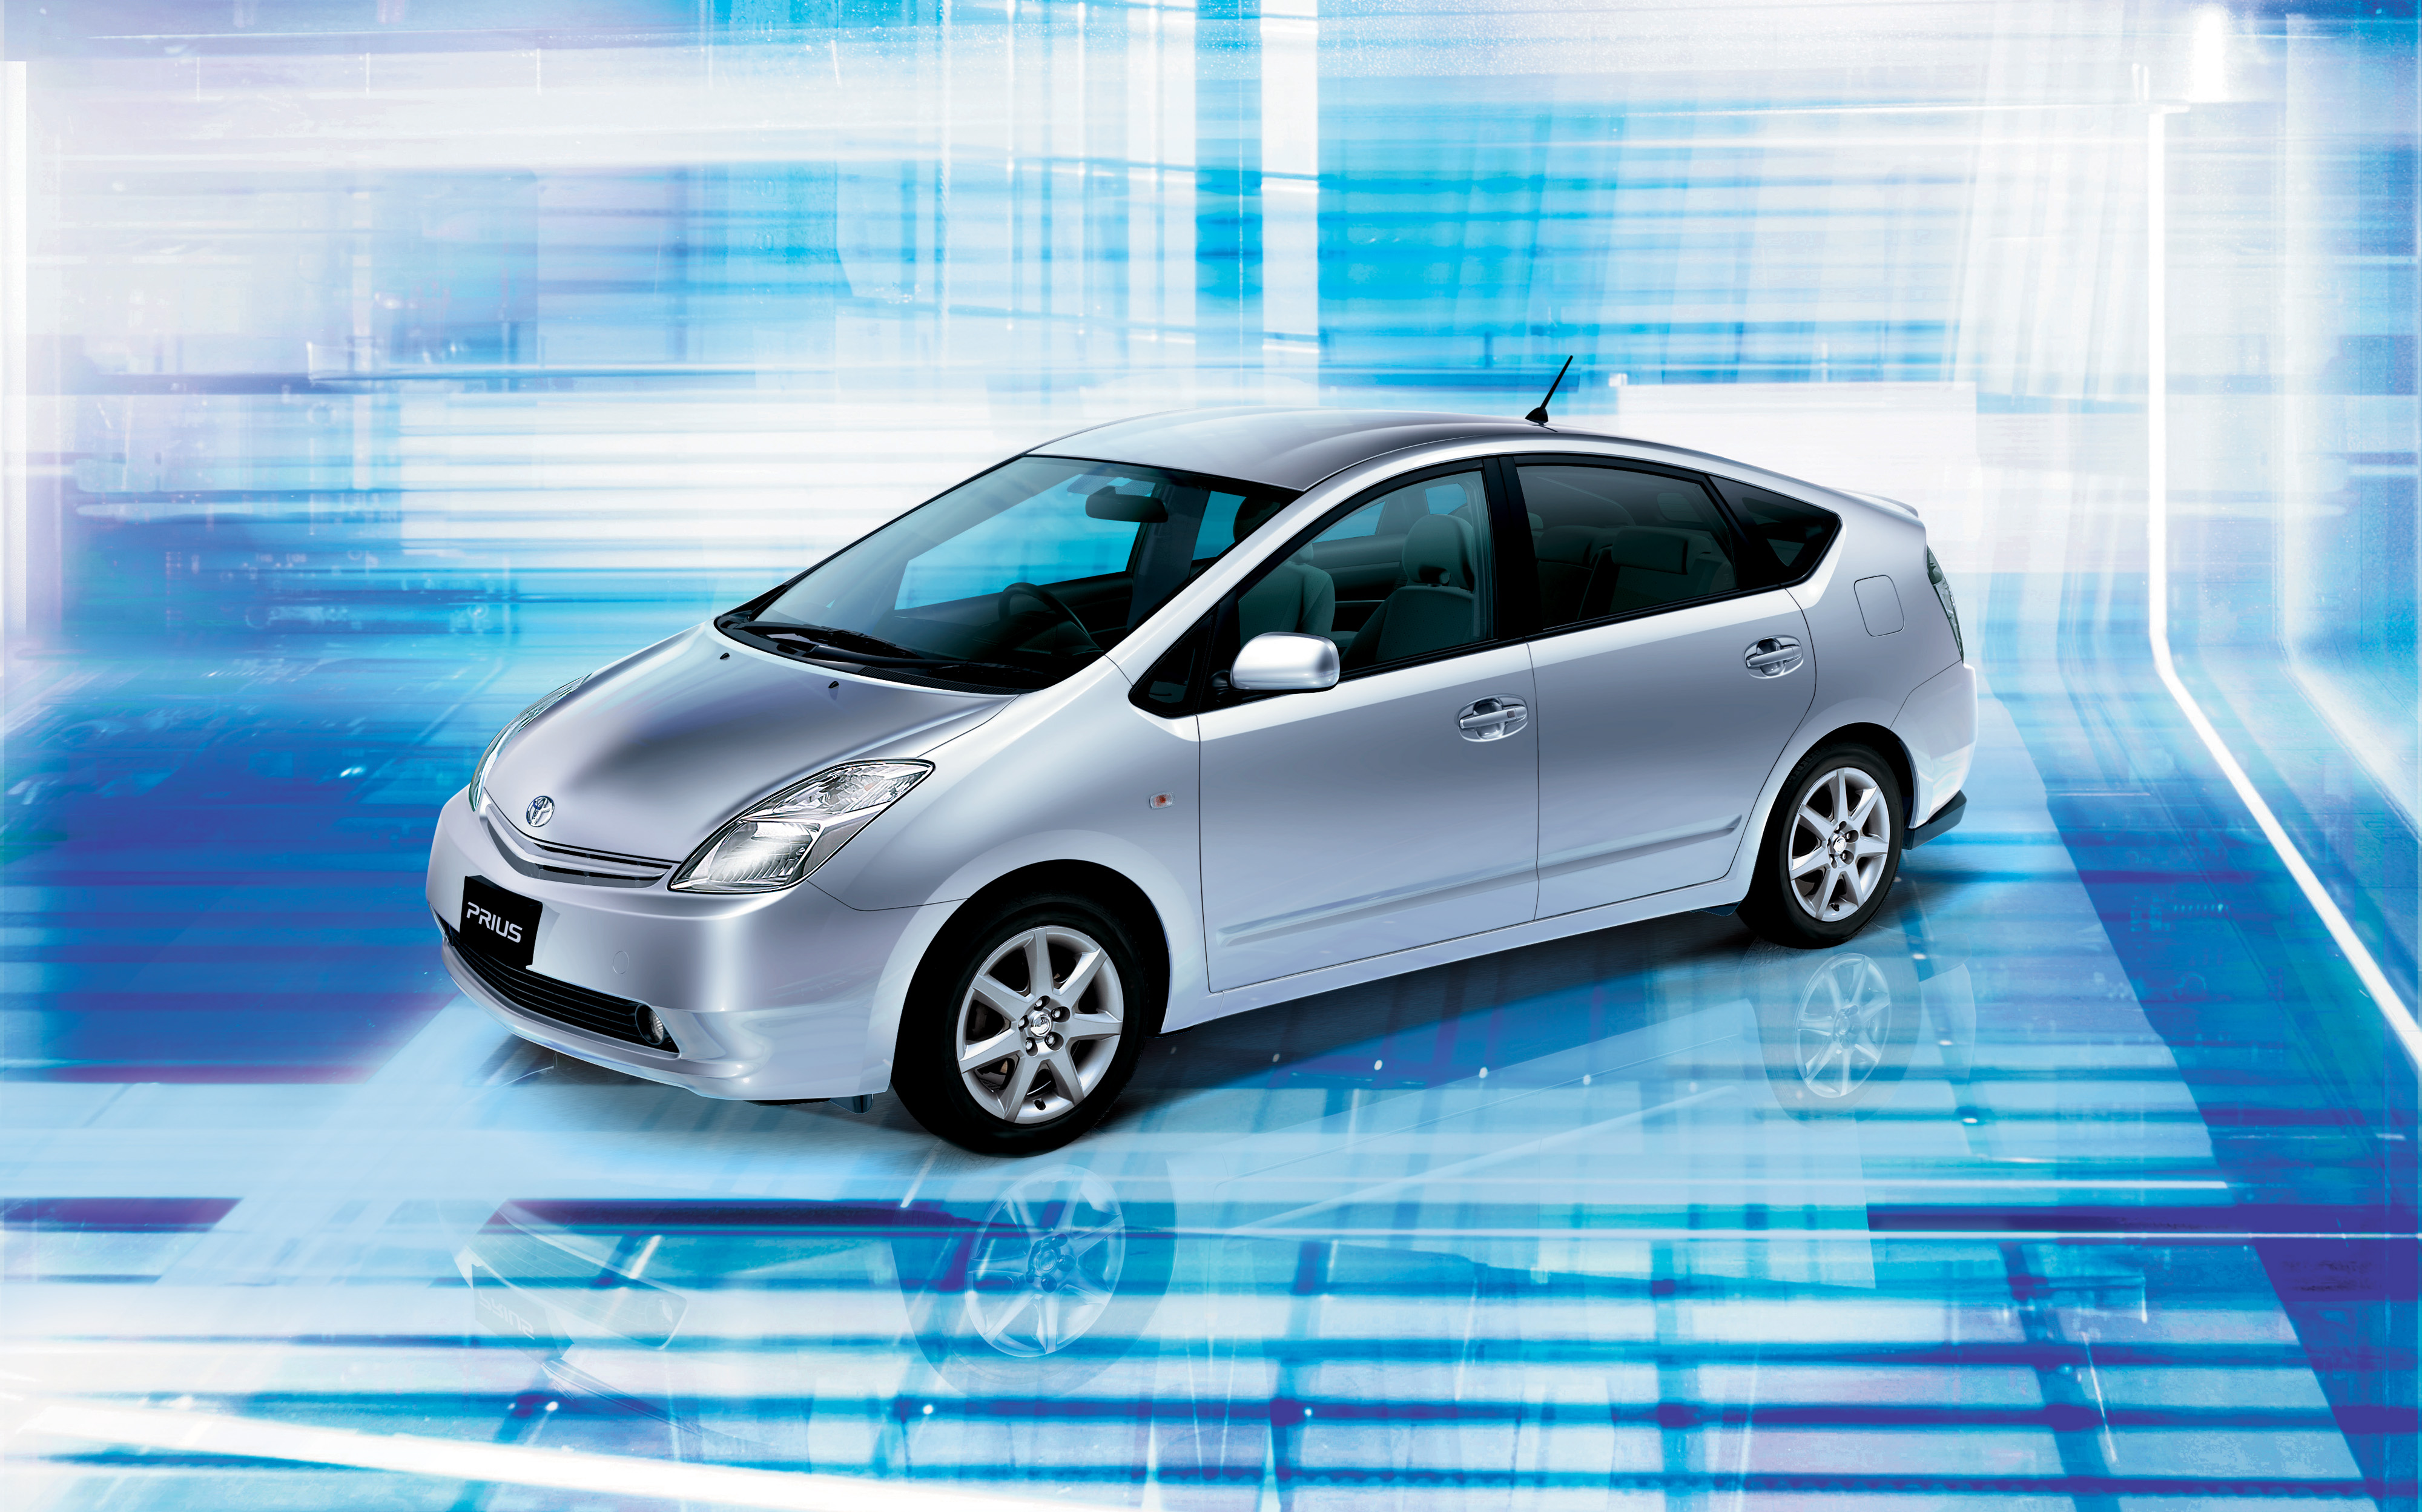 General 4000x2497 Toyota Toyota Prius hybrid (car) side view vehicle reflection car silver cars